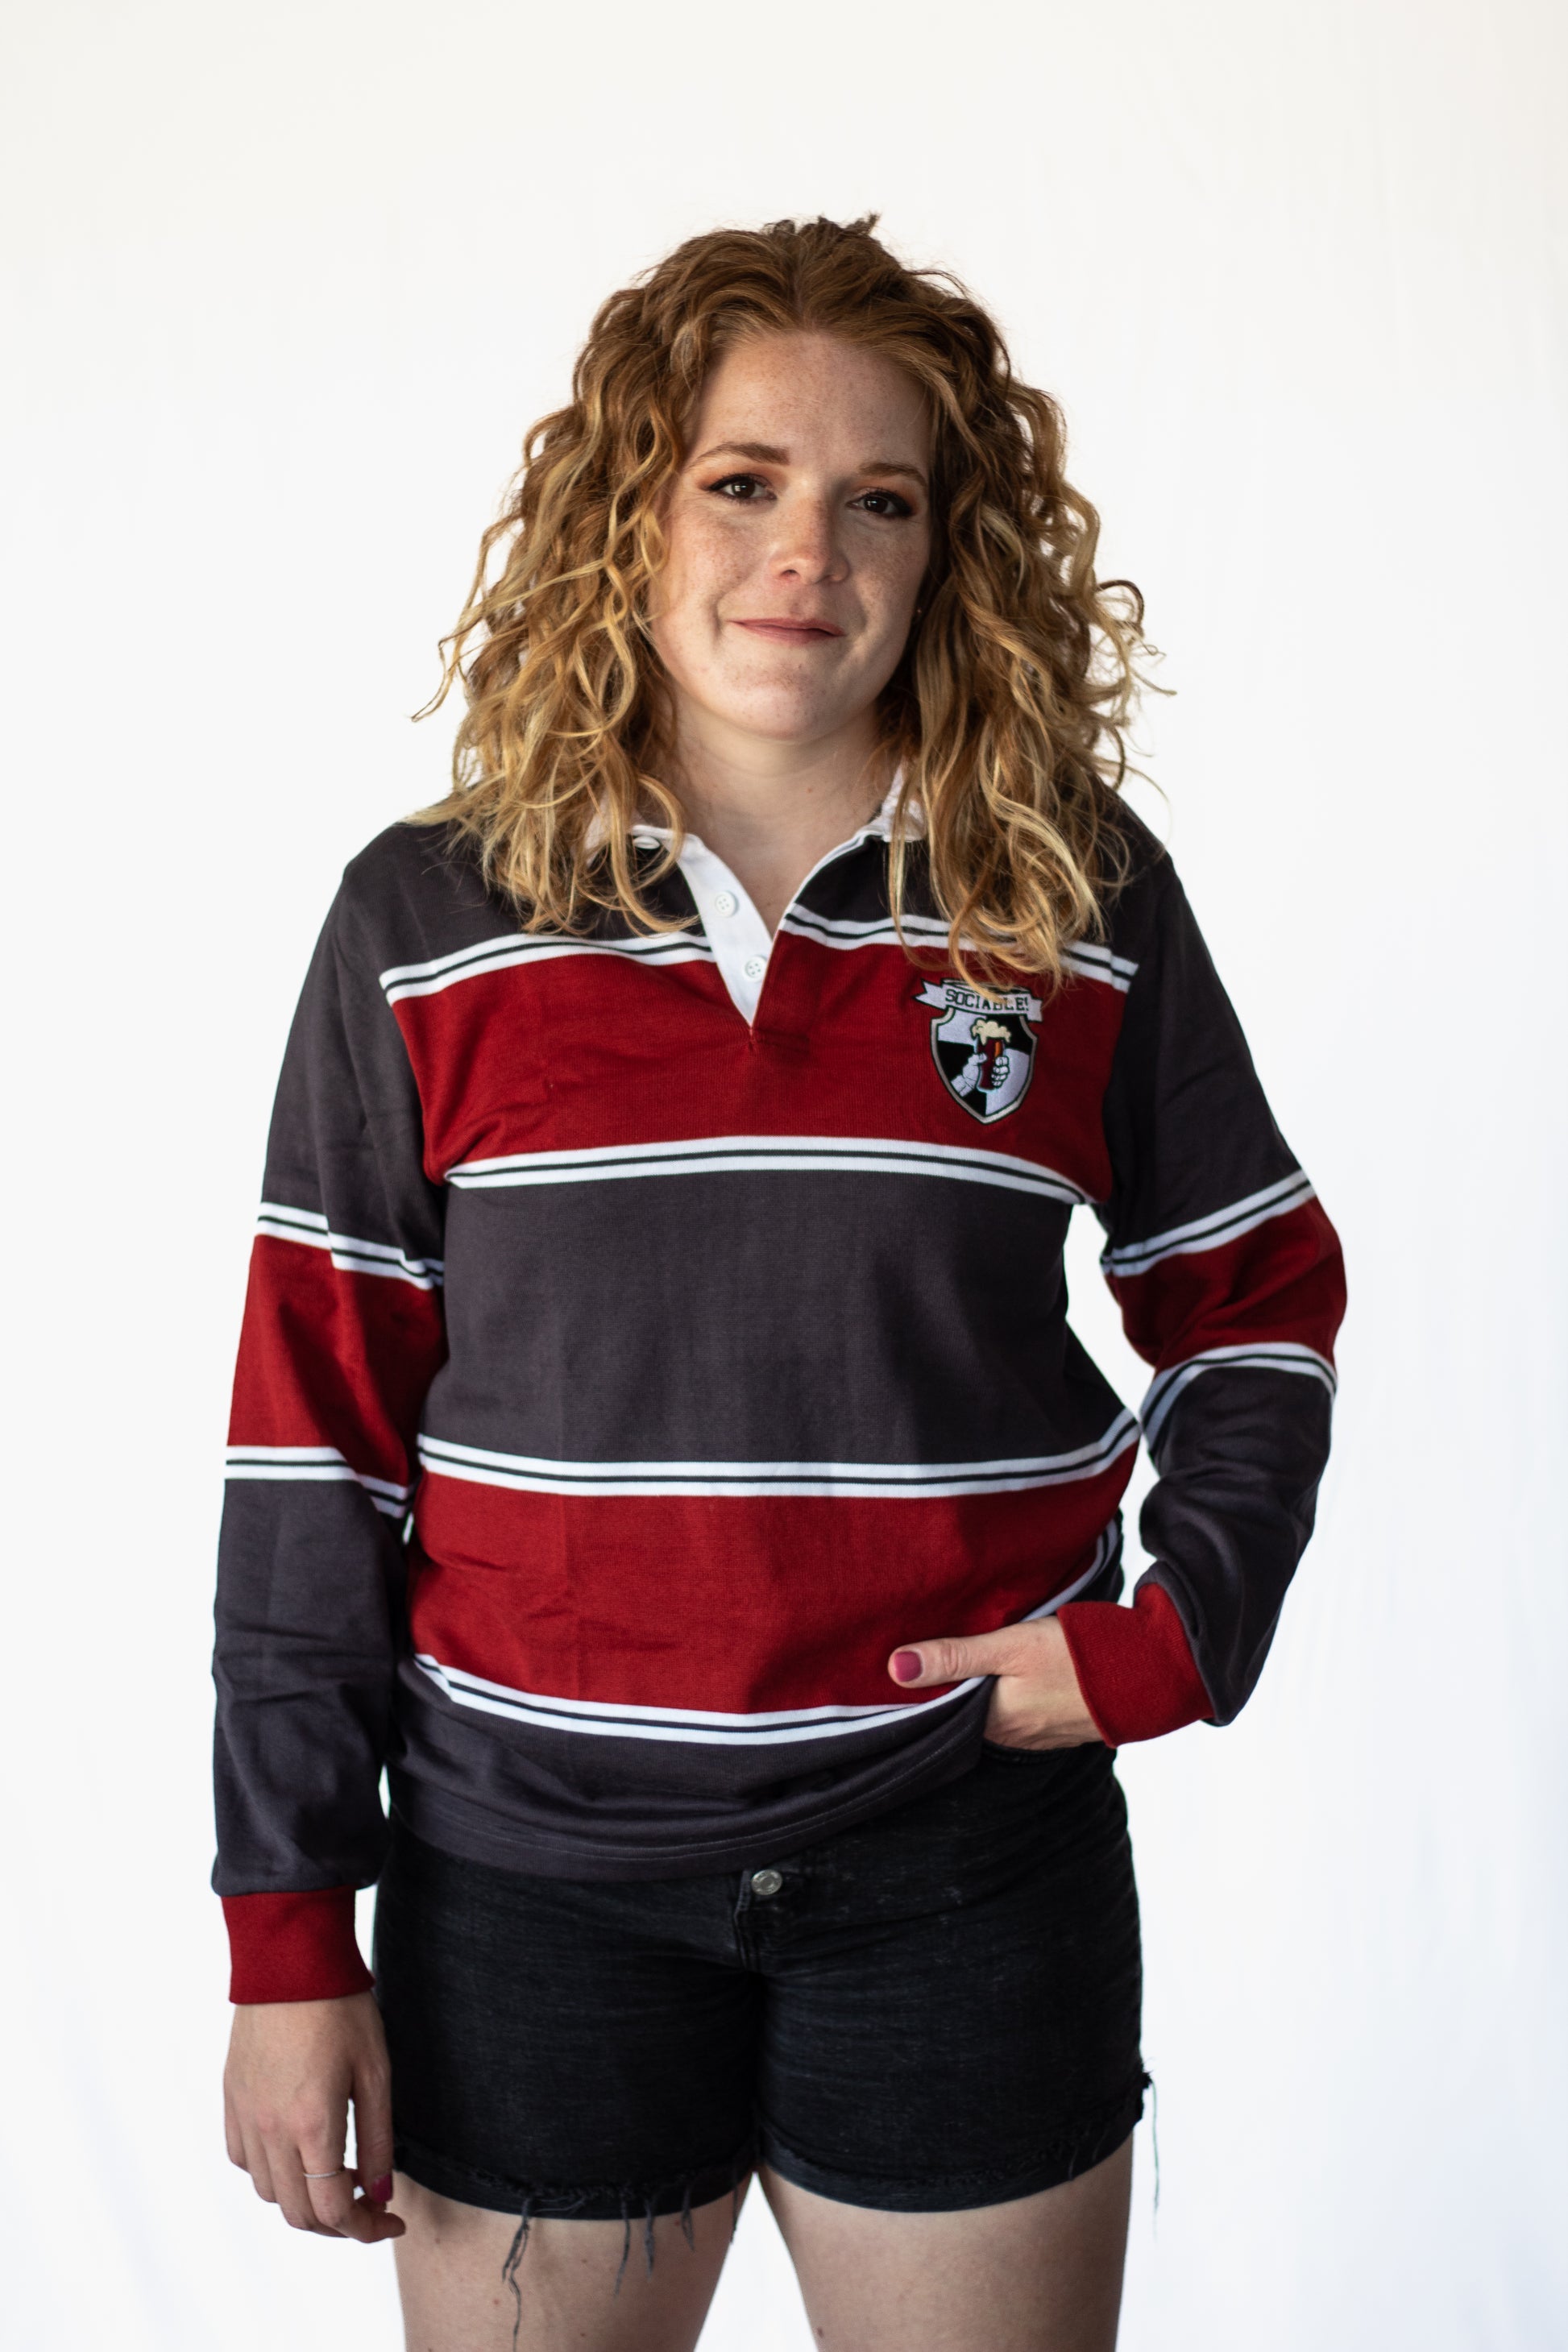 A woman wearing a red and grey sociable rugby shirt